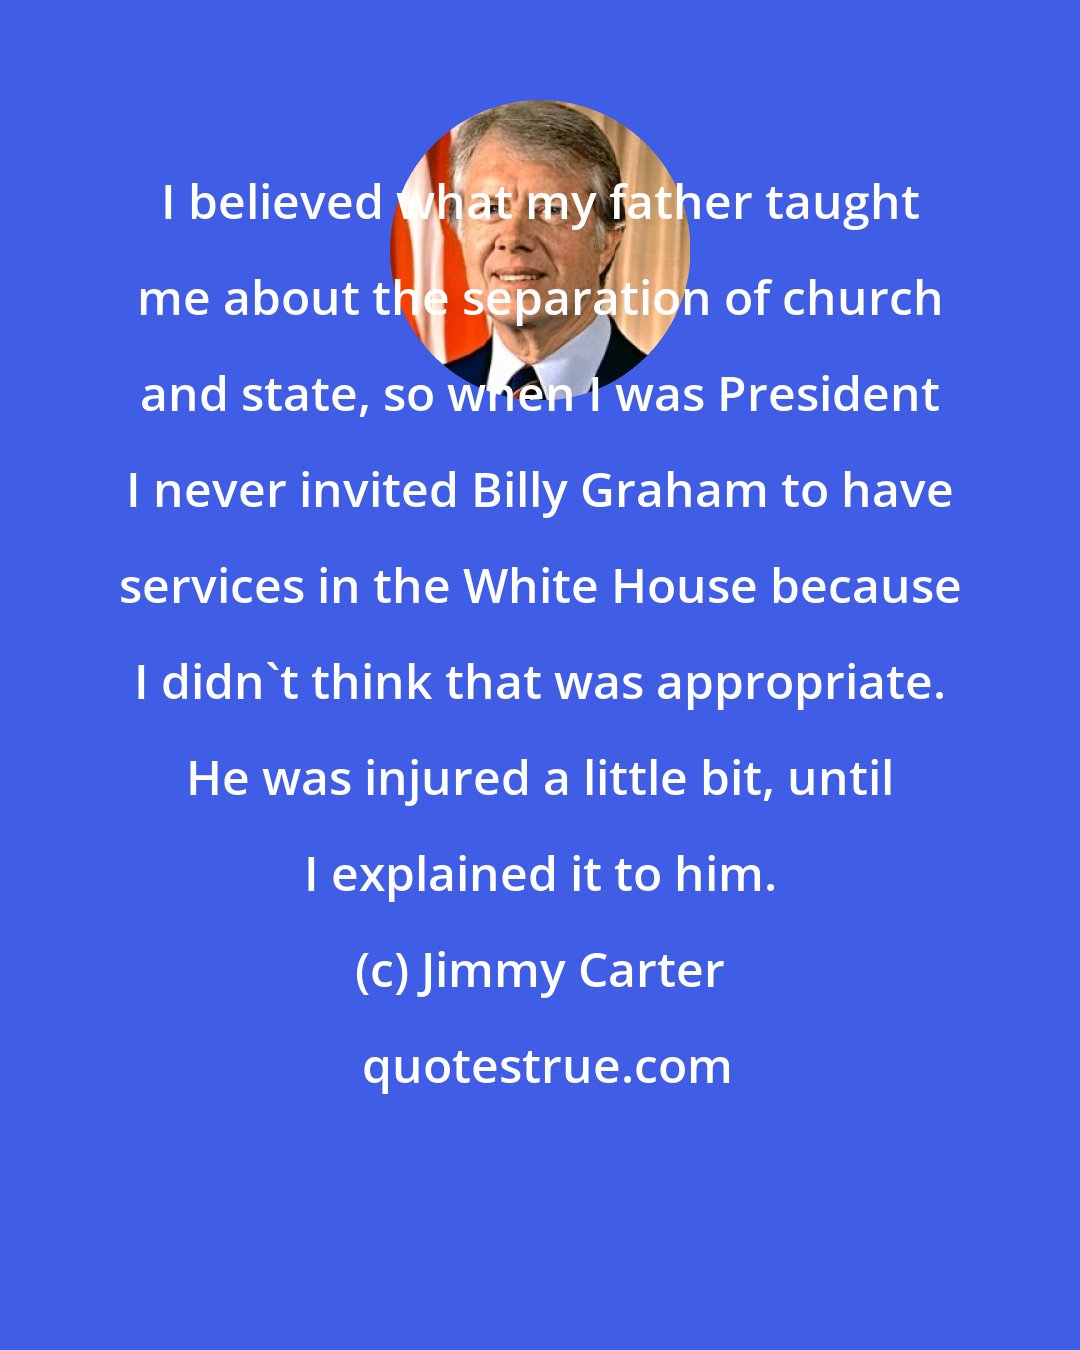 Jimmy Carter: I believed what my father taught me about the separation of church and state, so when I was President I never invited Billy Graham to have services in the White House because I didn't think that was appropriate. He was injured a little bit, until I explained it to him.